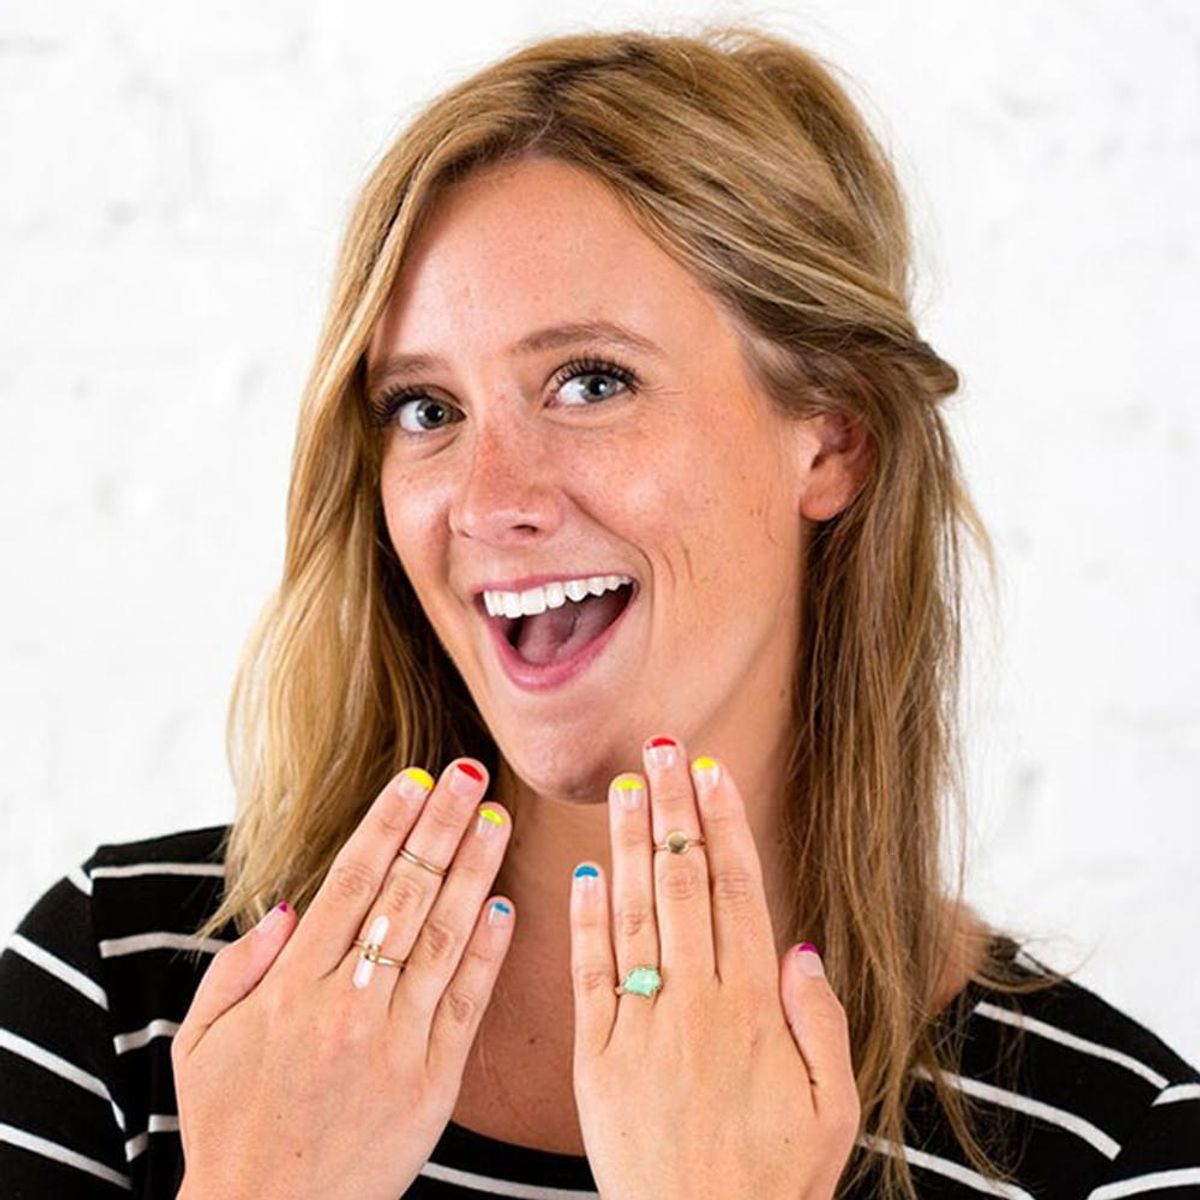 You’ll Want to Get Your Hands on Target’s New Nail Polish